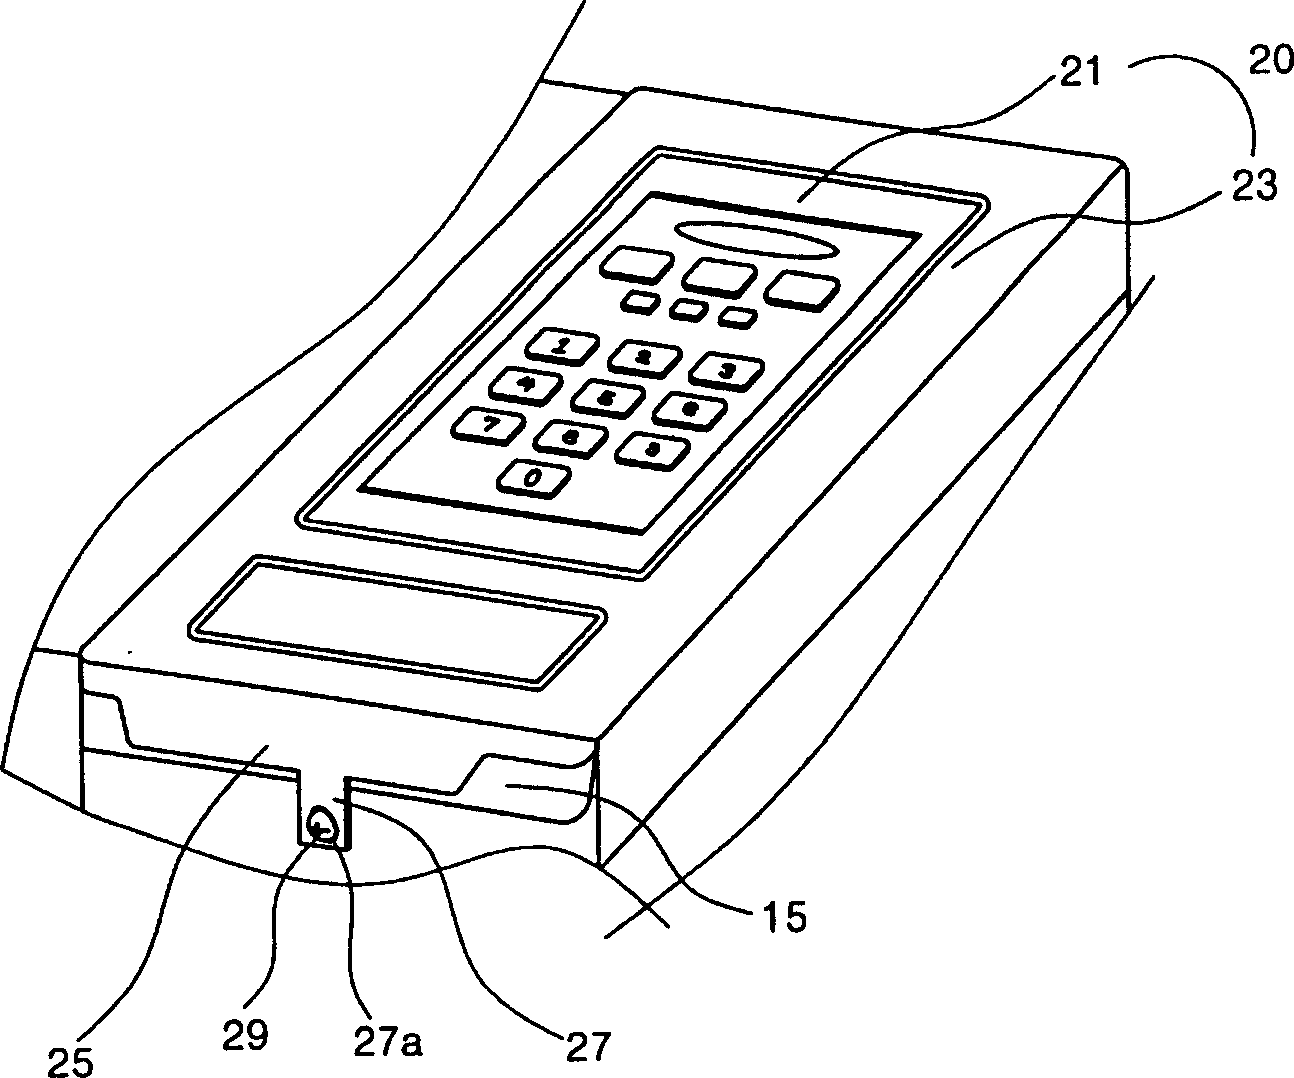 Earthing structure for control panel of microwave oven